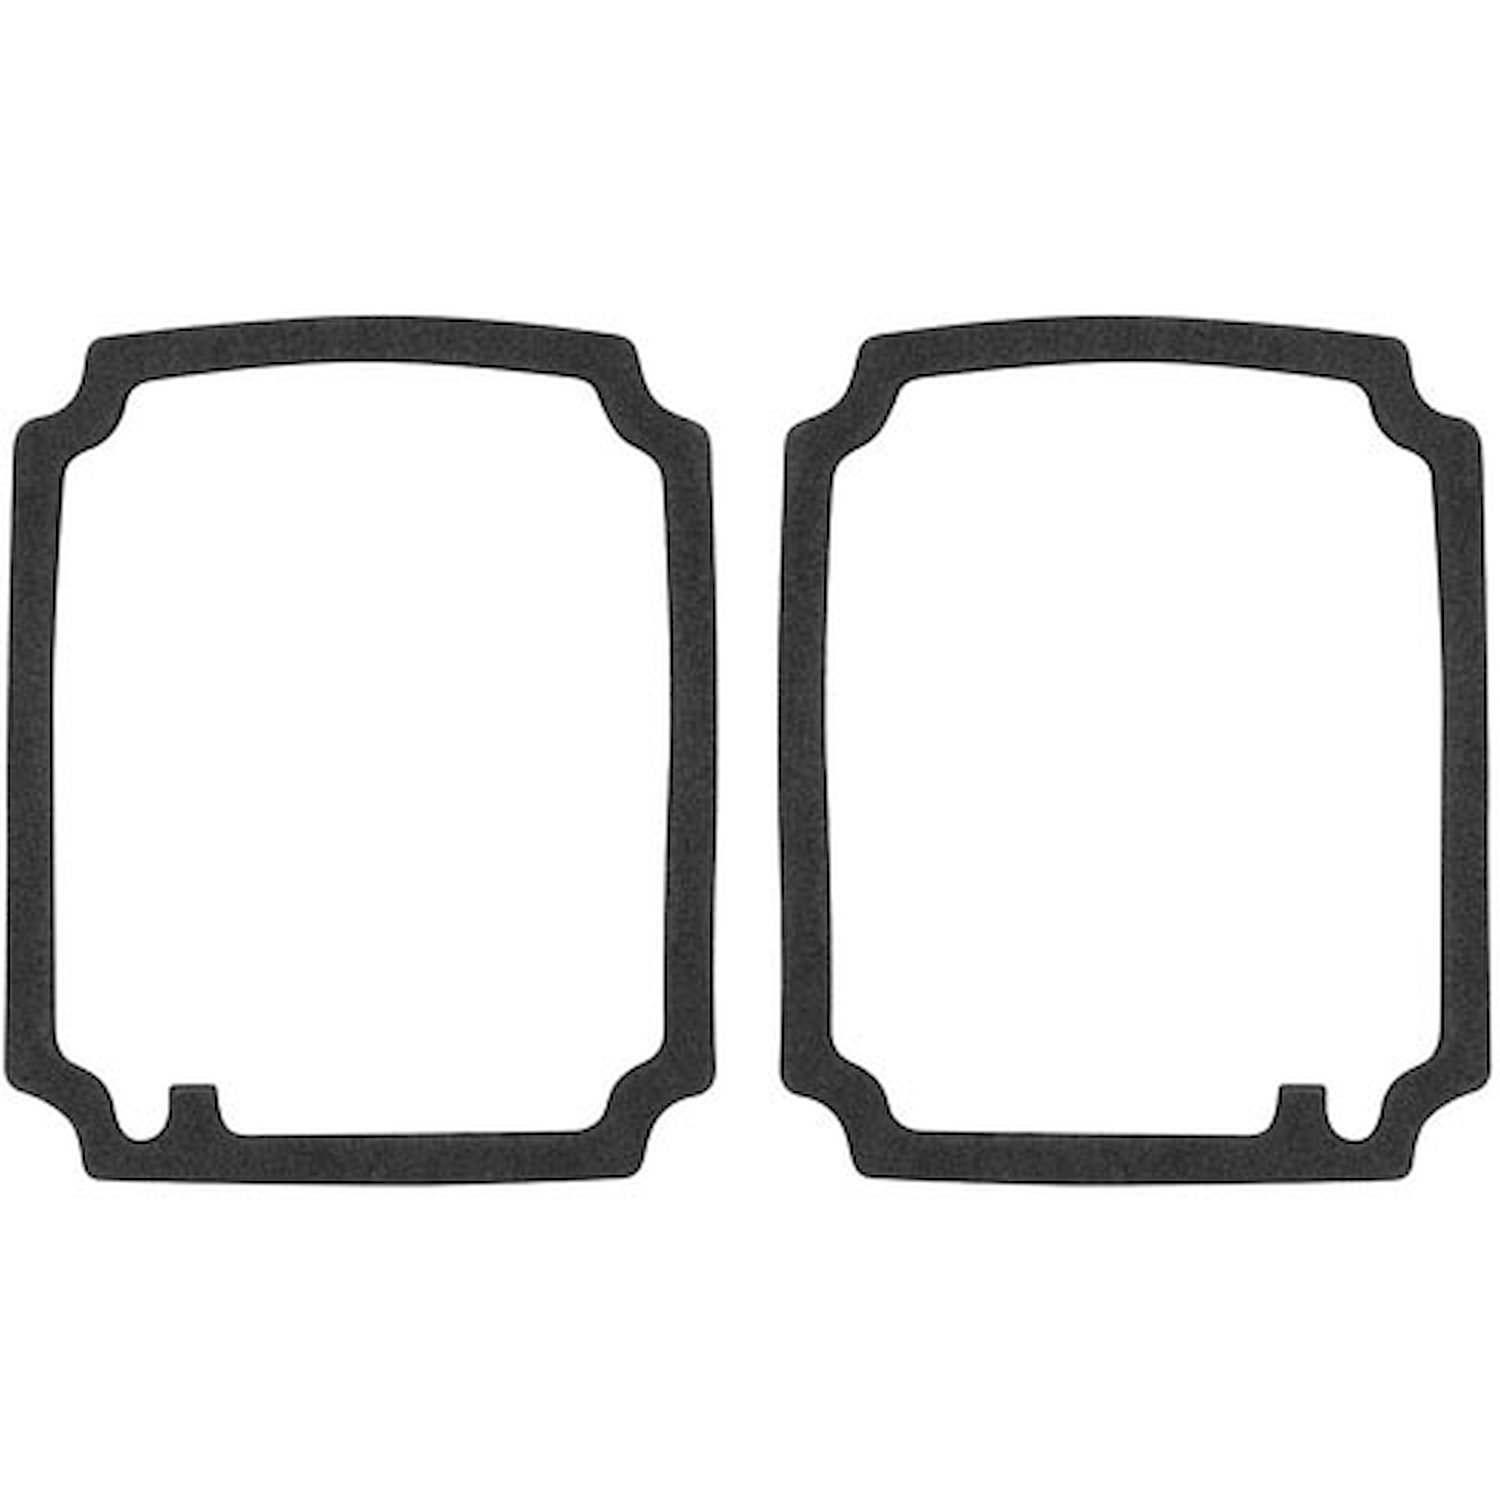 Tail Lamp Lens Gaskets 1970-72 Chevelle Wagon/El Camino